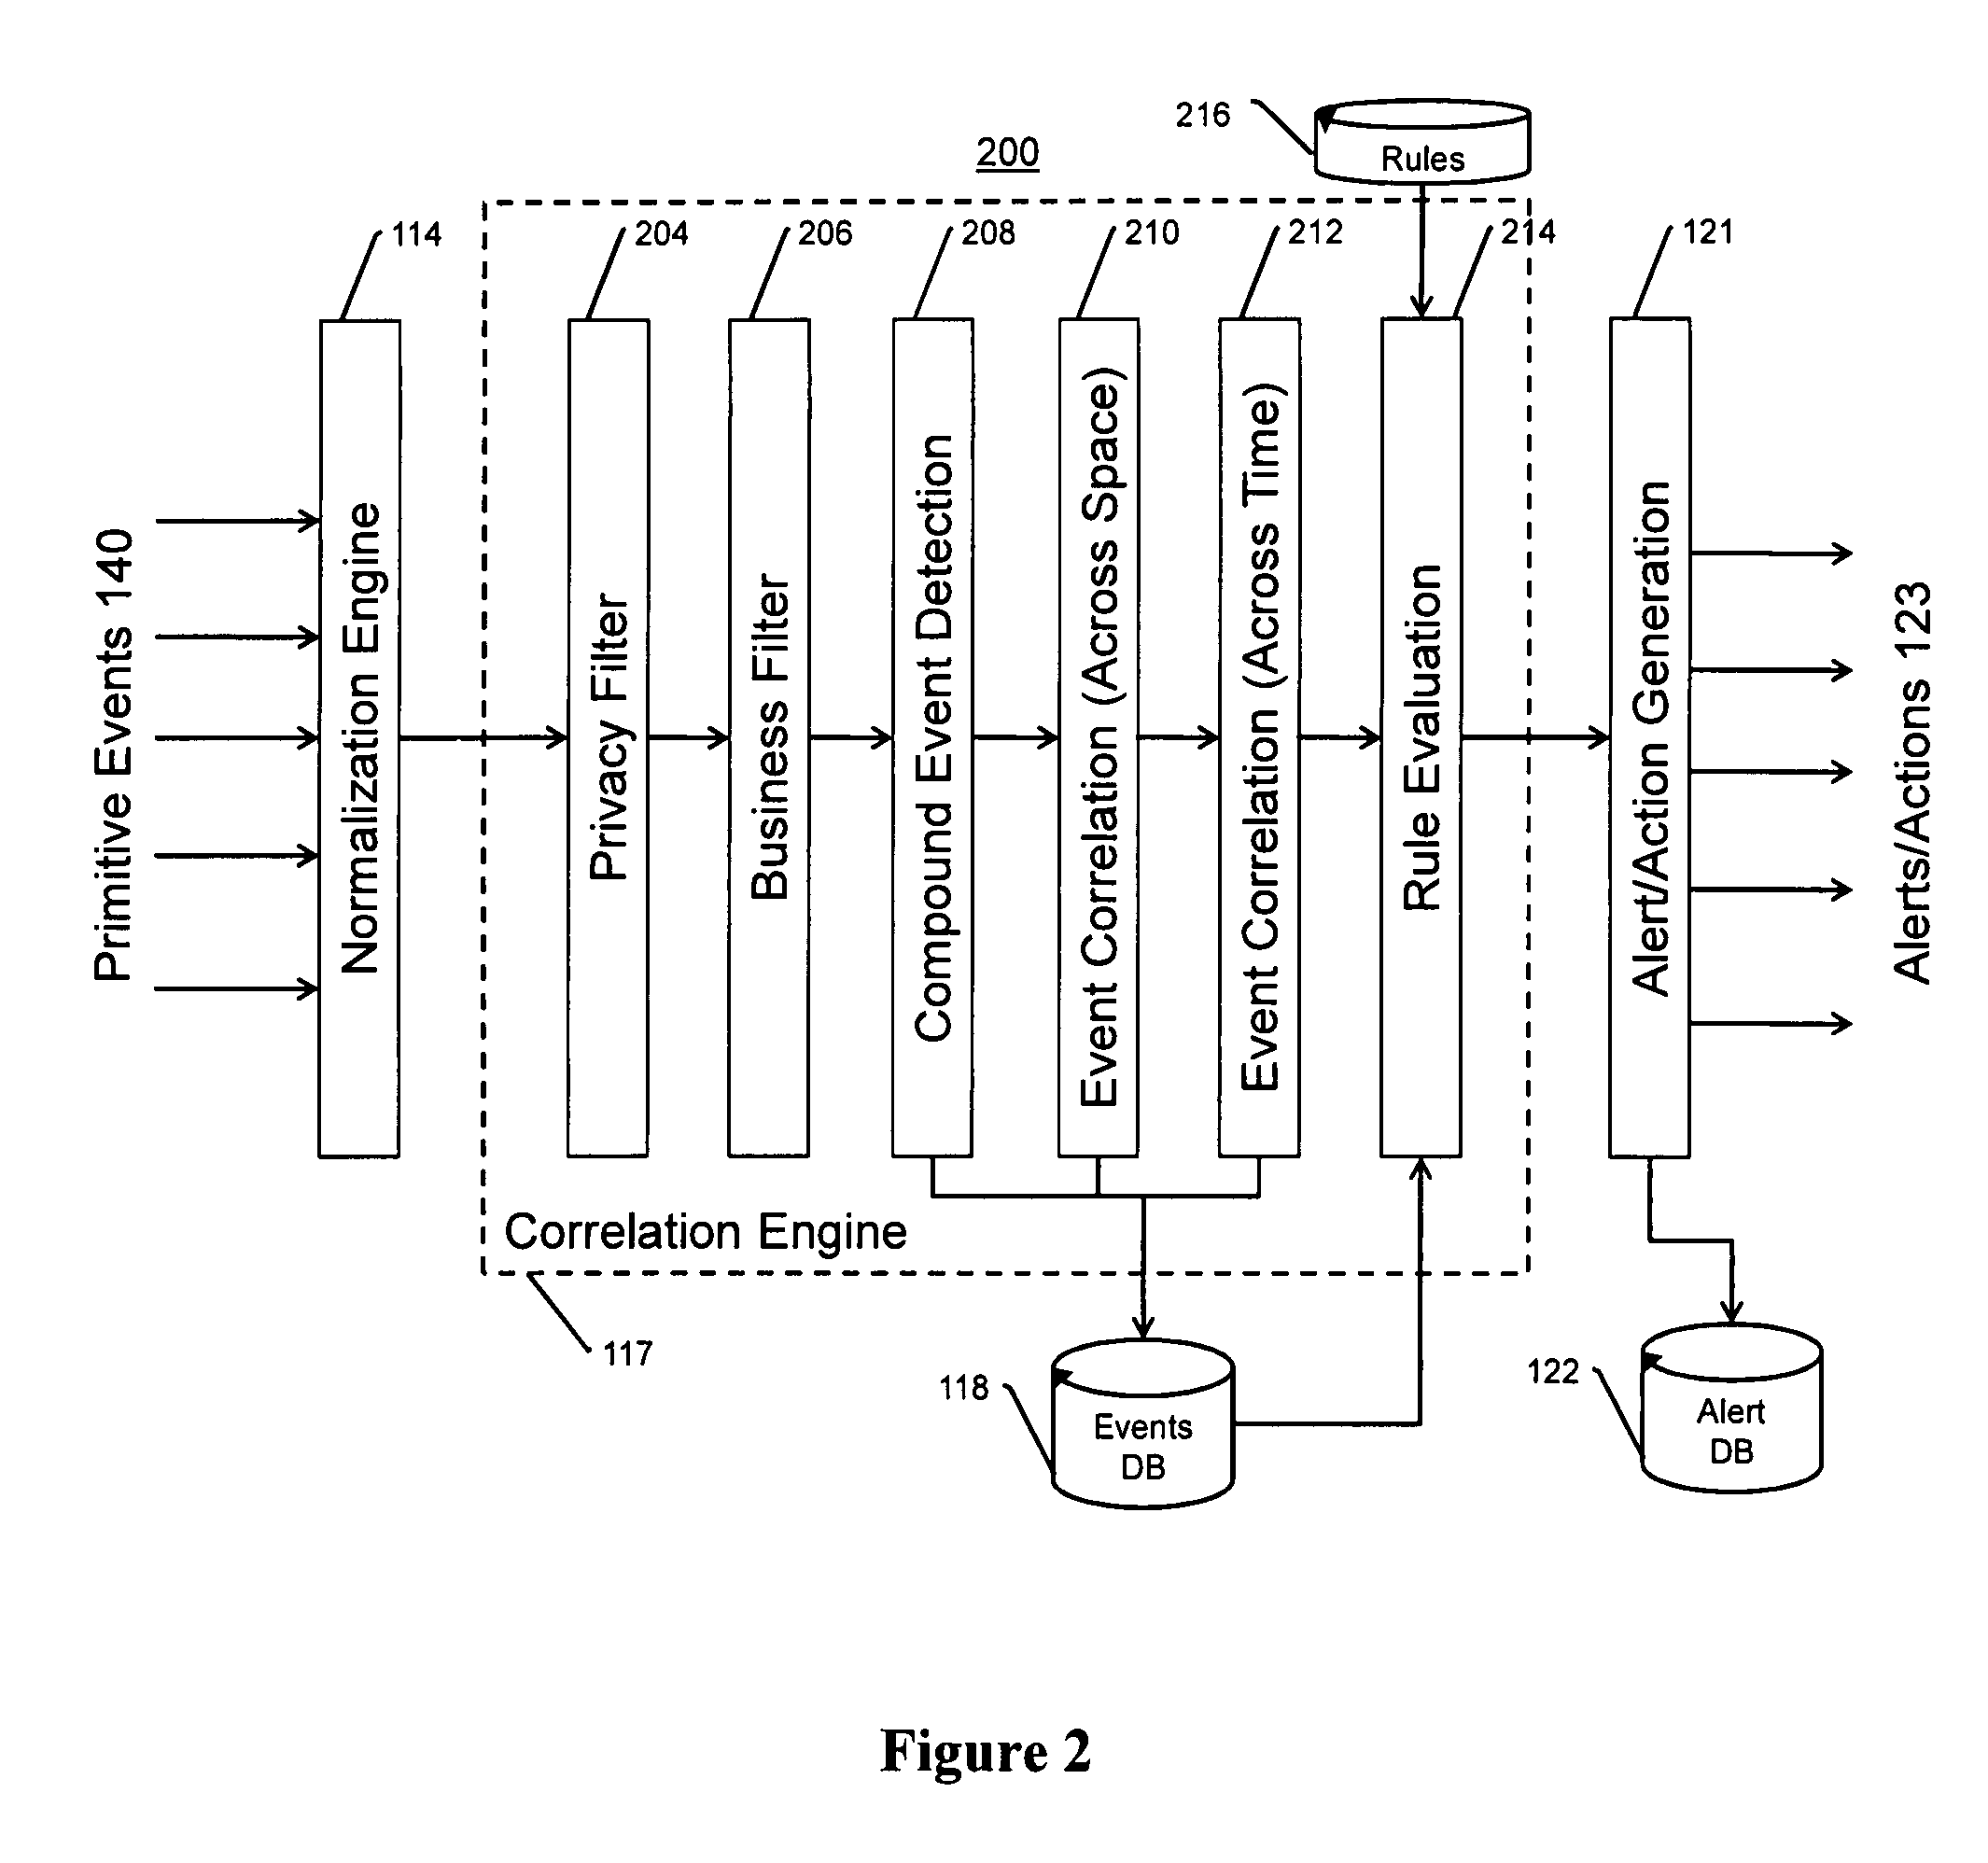 Video surveillance, storage, and alerting system having network management, hierarchical data storage, video tip processing, and vehicle plate analysis